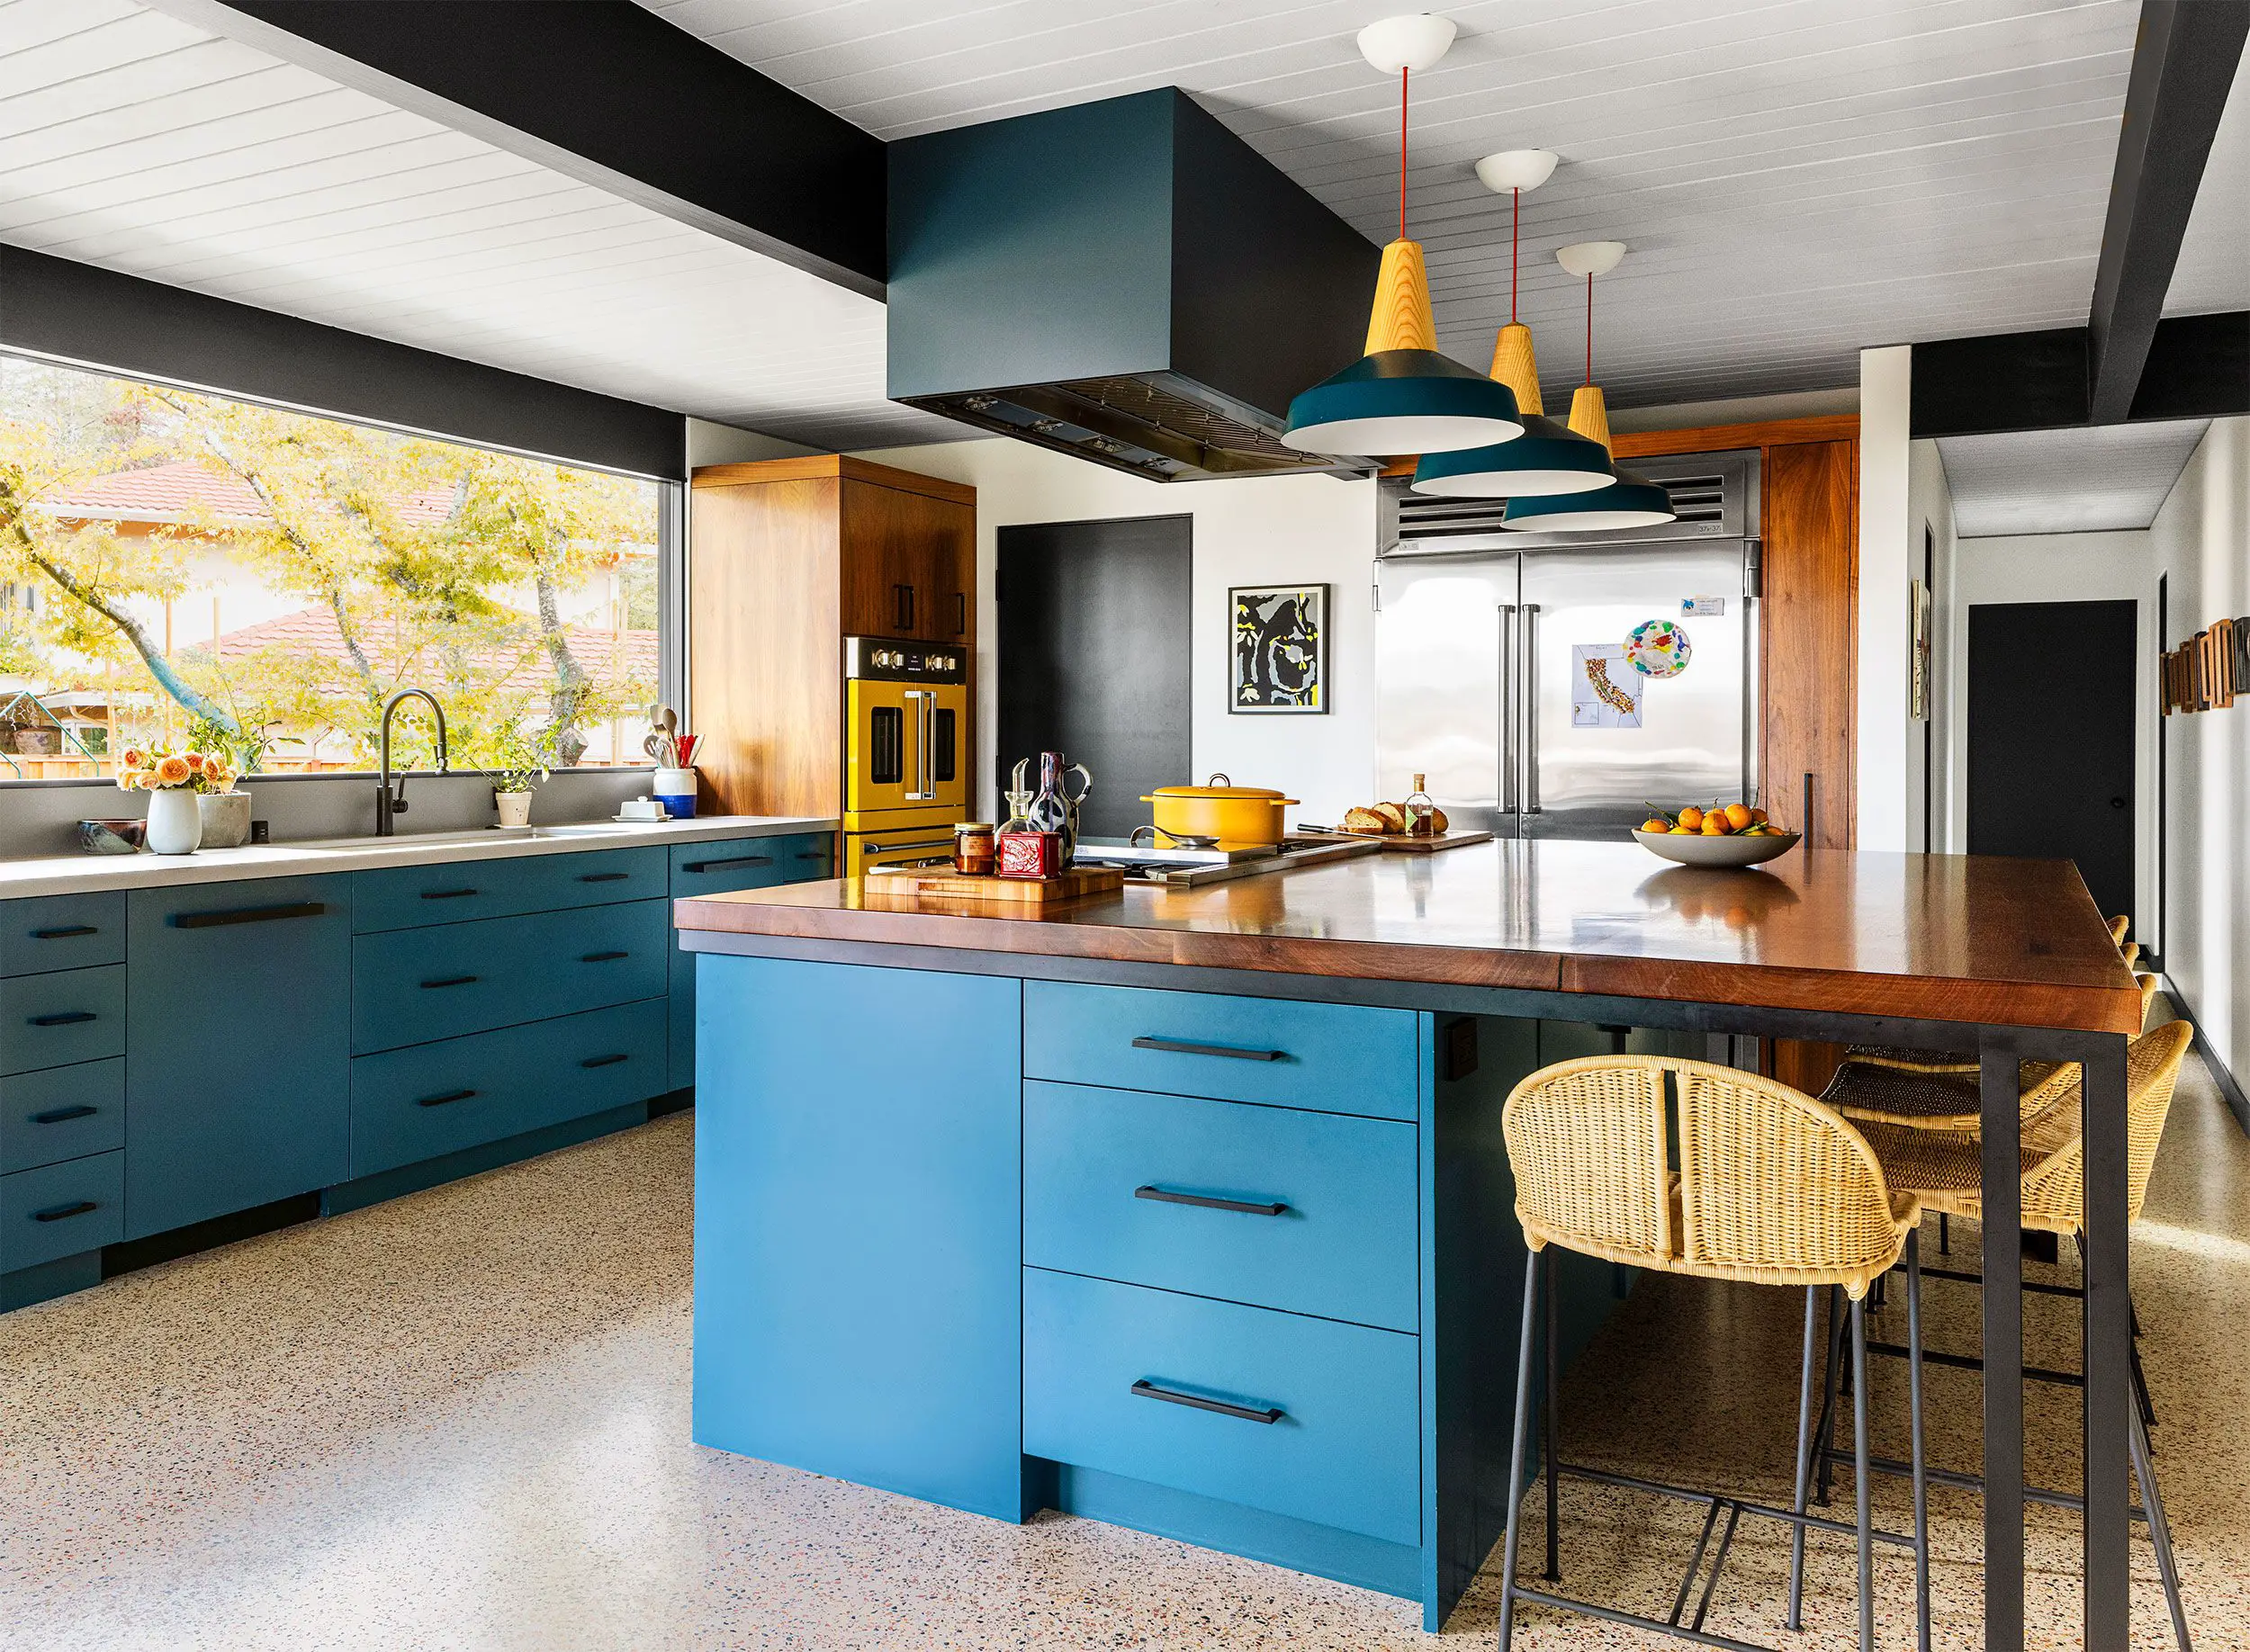 Where To Shop For Kitchen Fixtures That Work With Blue Cabinets